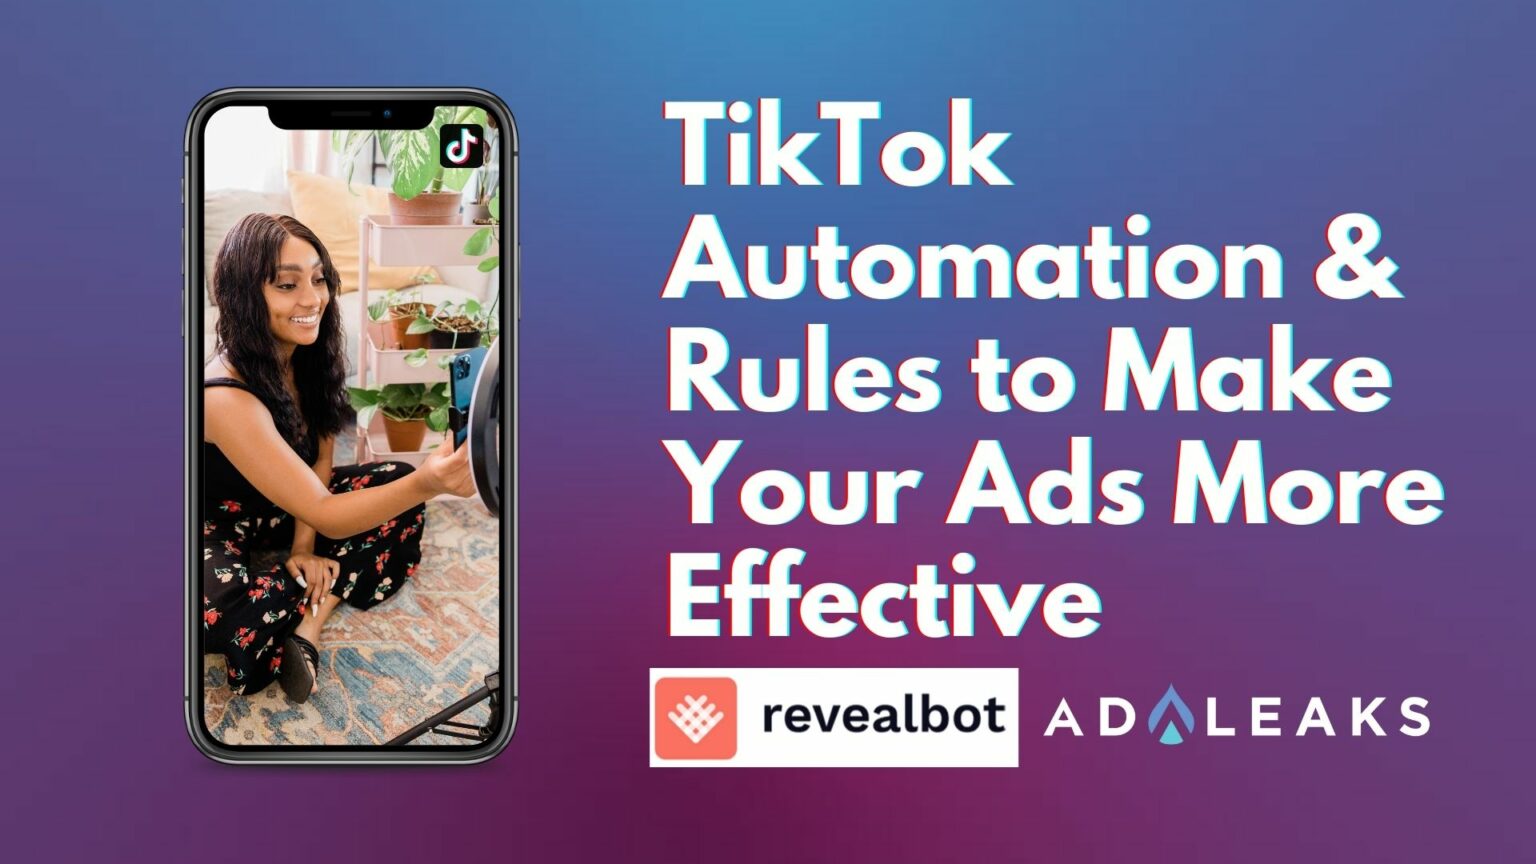 TikTok Automation & Rules to Make Your Ads More Effective